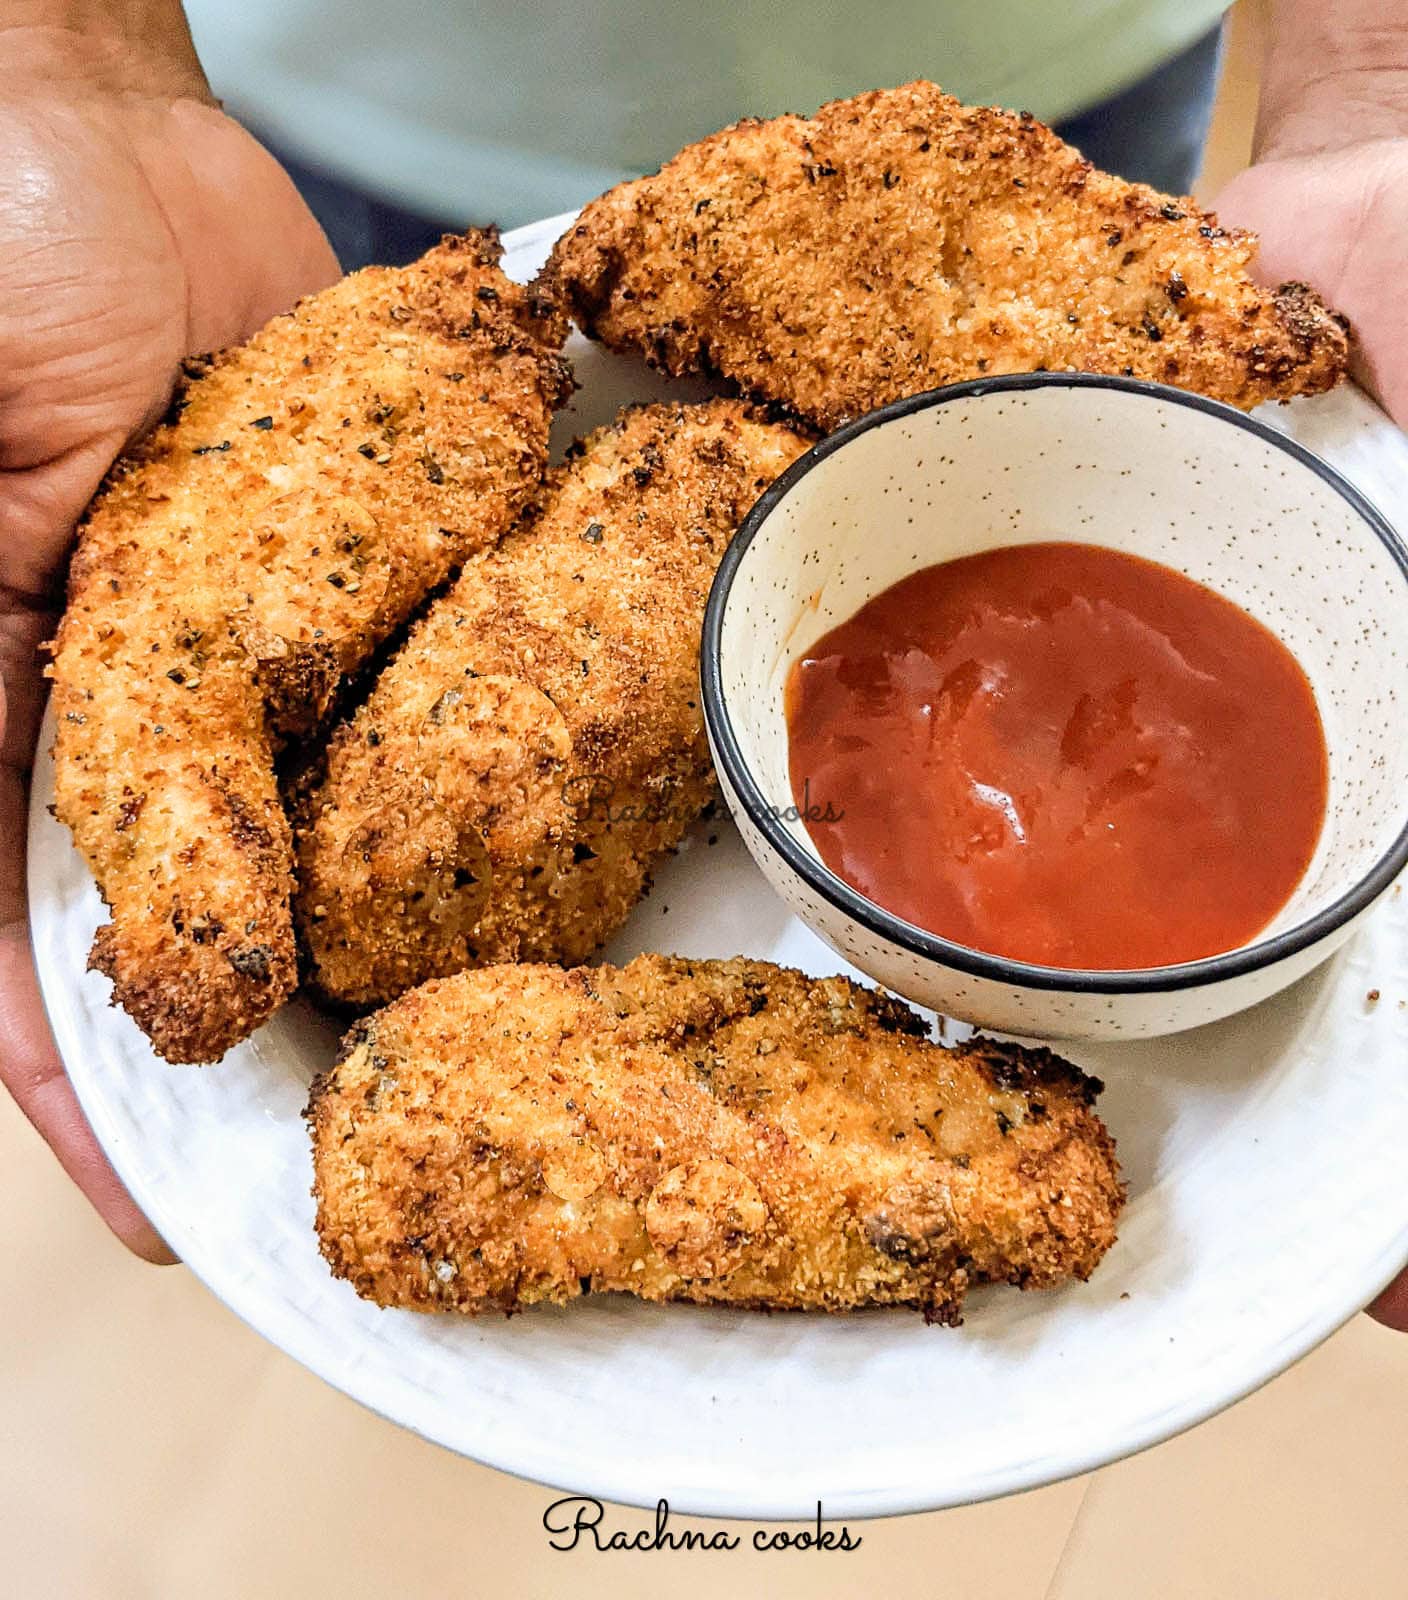 4 air fried chicken tenders in a white plate with a bowl of ketchup. This is kept on a slate grey background.